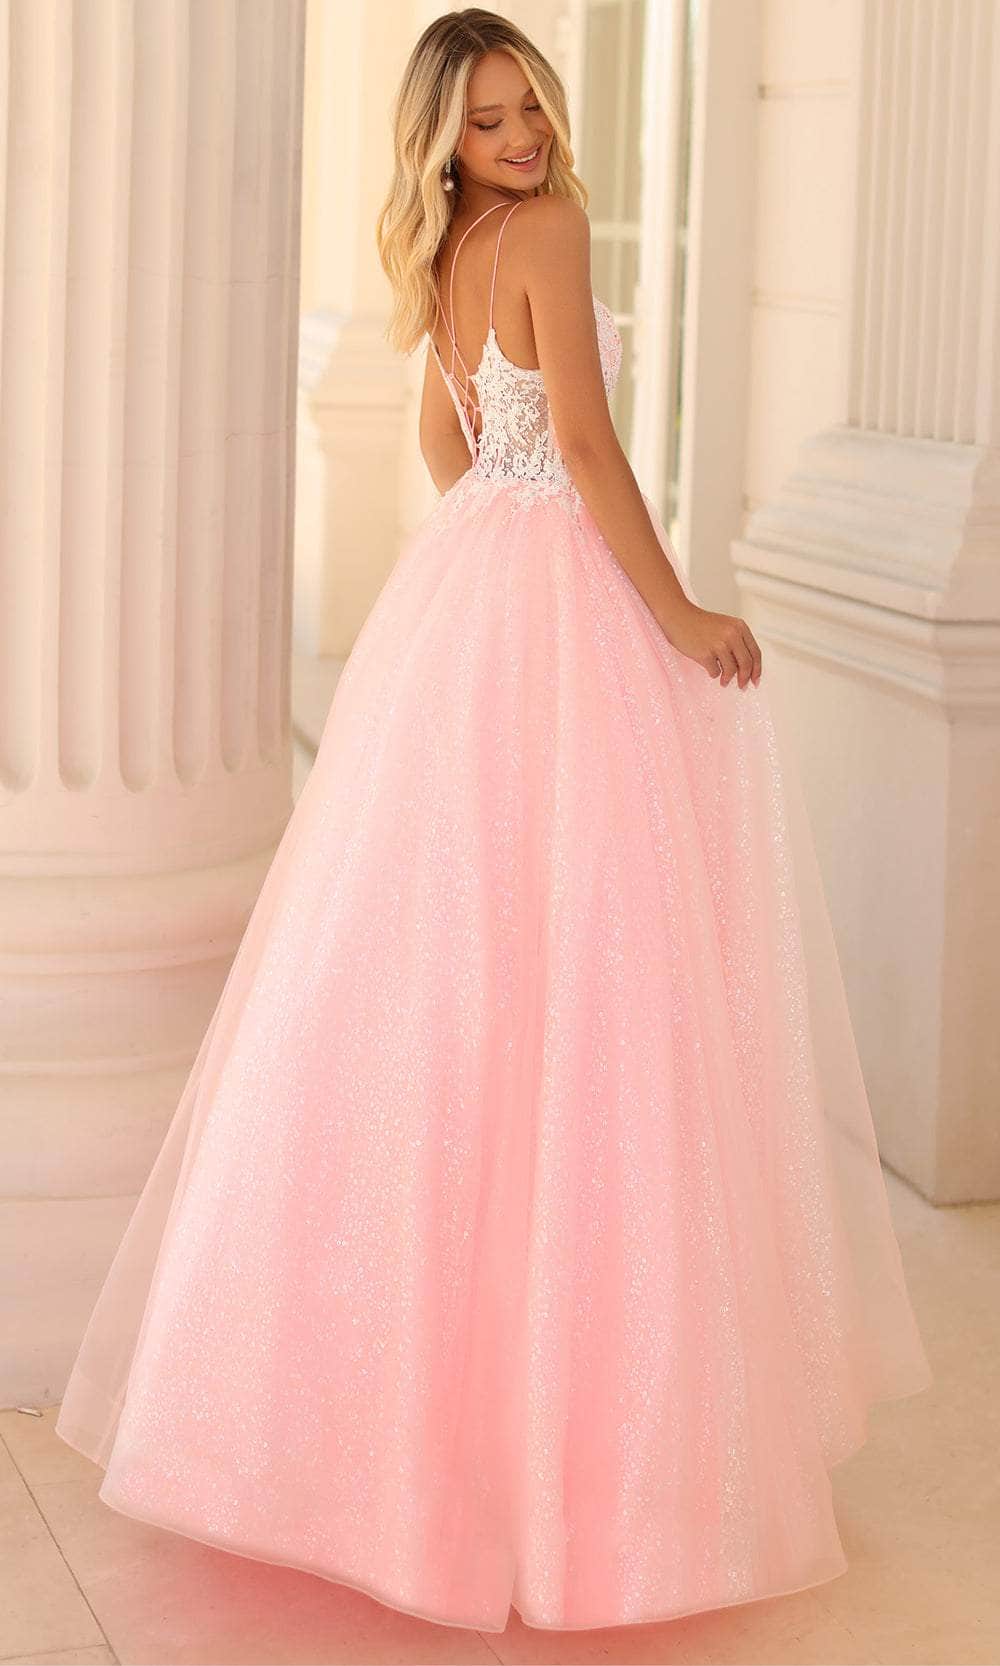 Clarisse 810602 - Dual Strap Shimmer Ballgown Special Occasion Dress